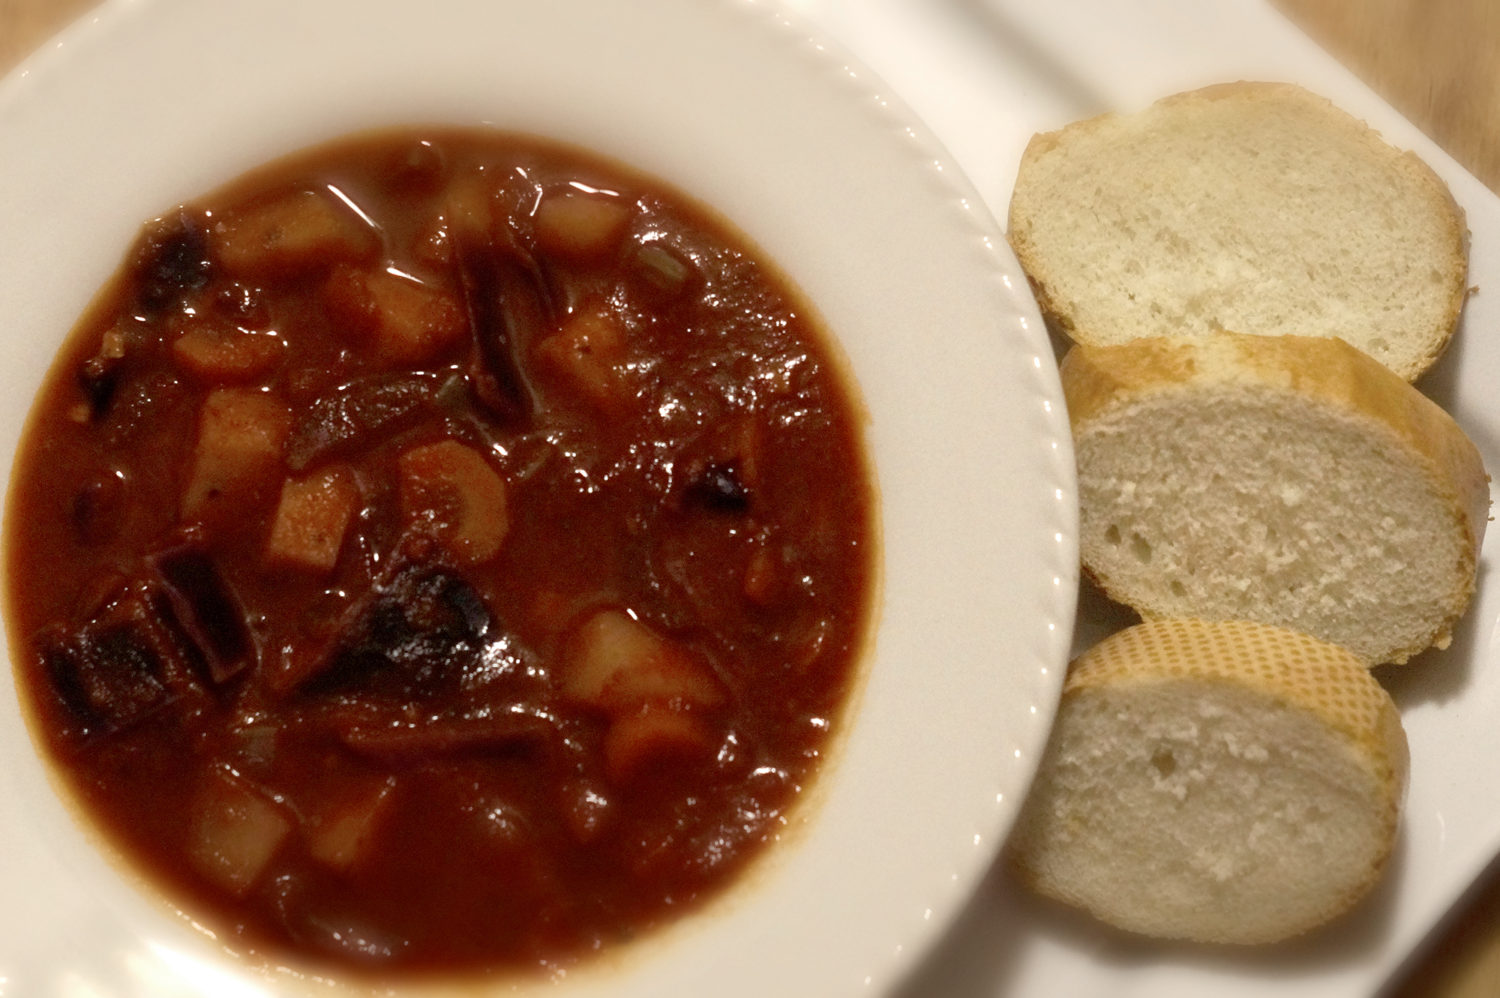 Tomato Vegetable Soup with Red Cabbage and Crusty Bread